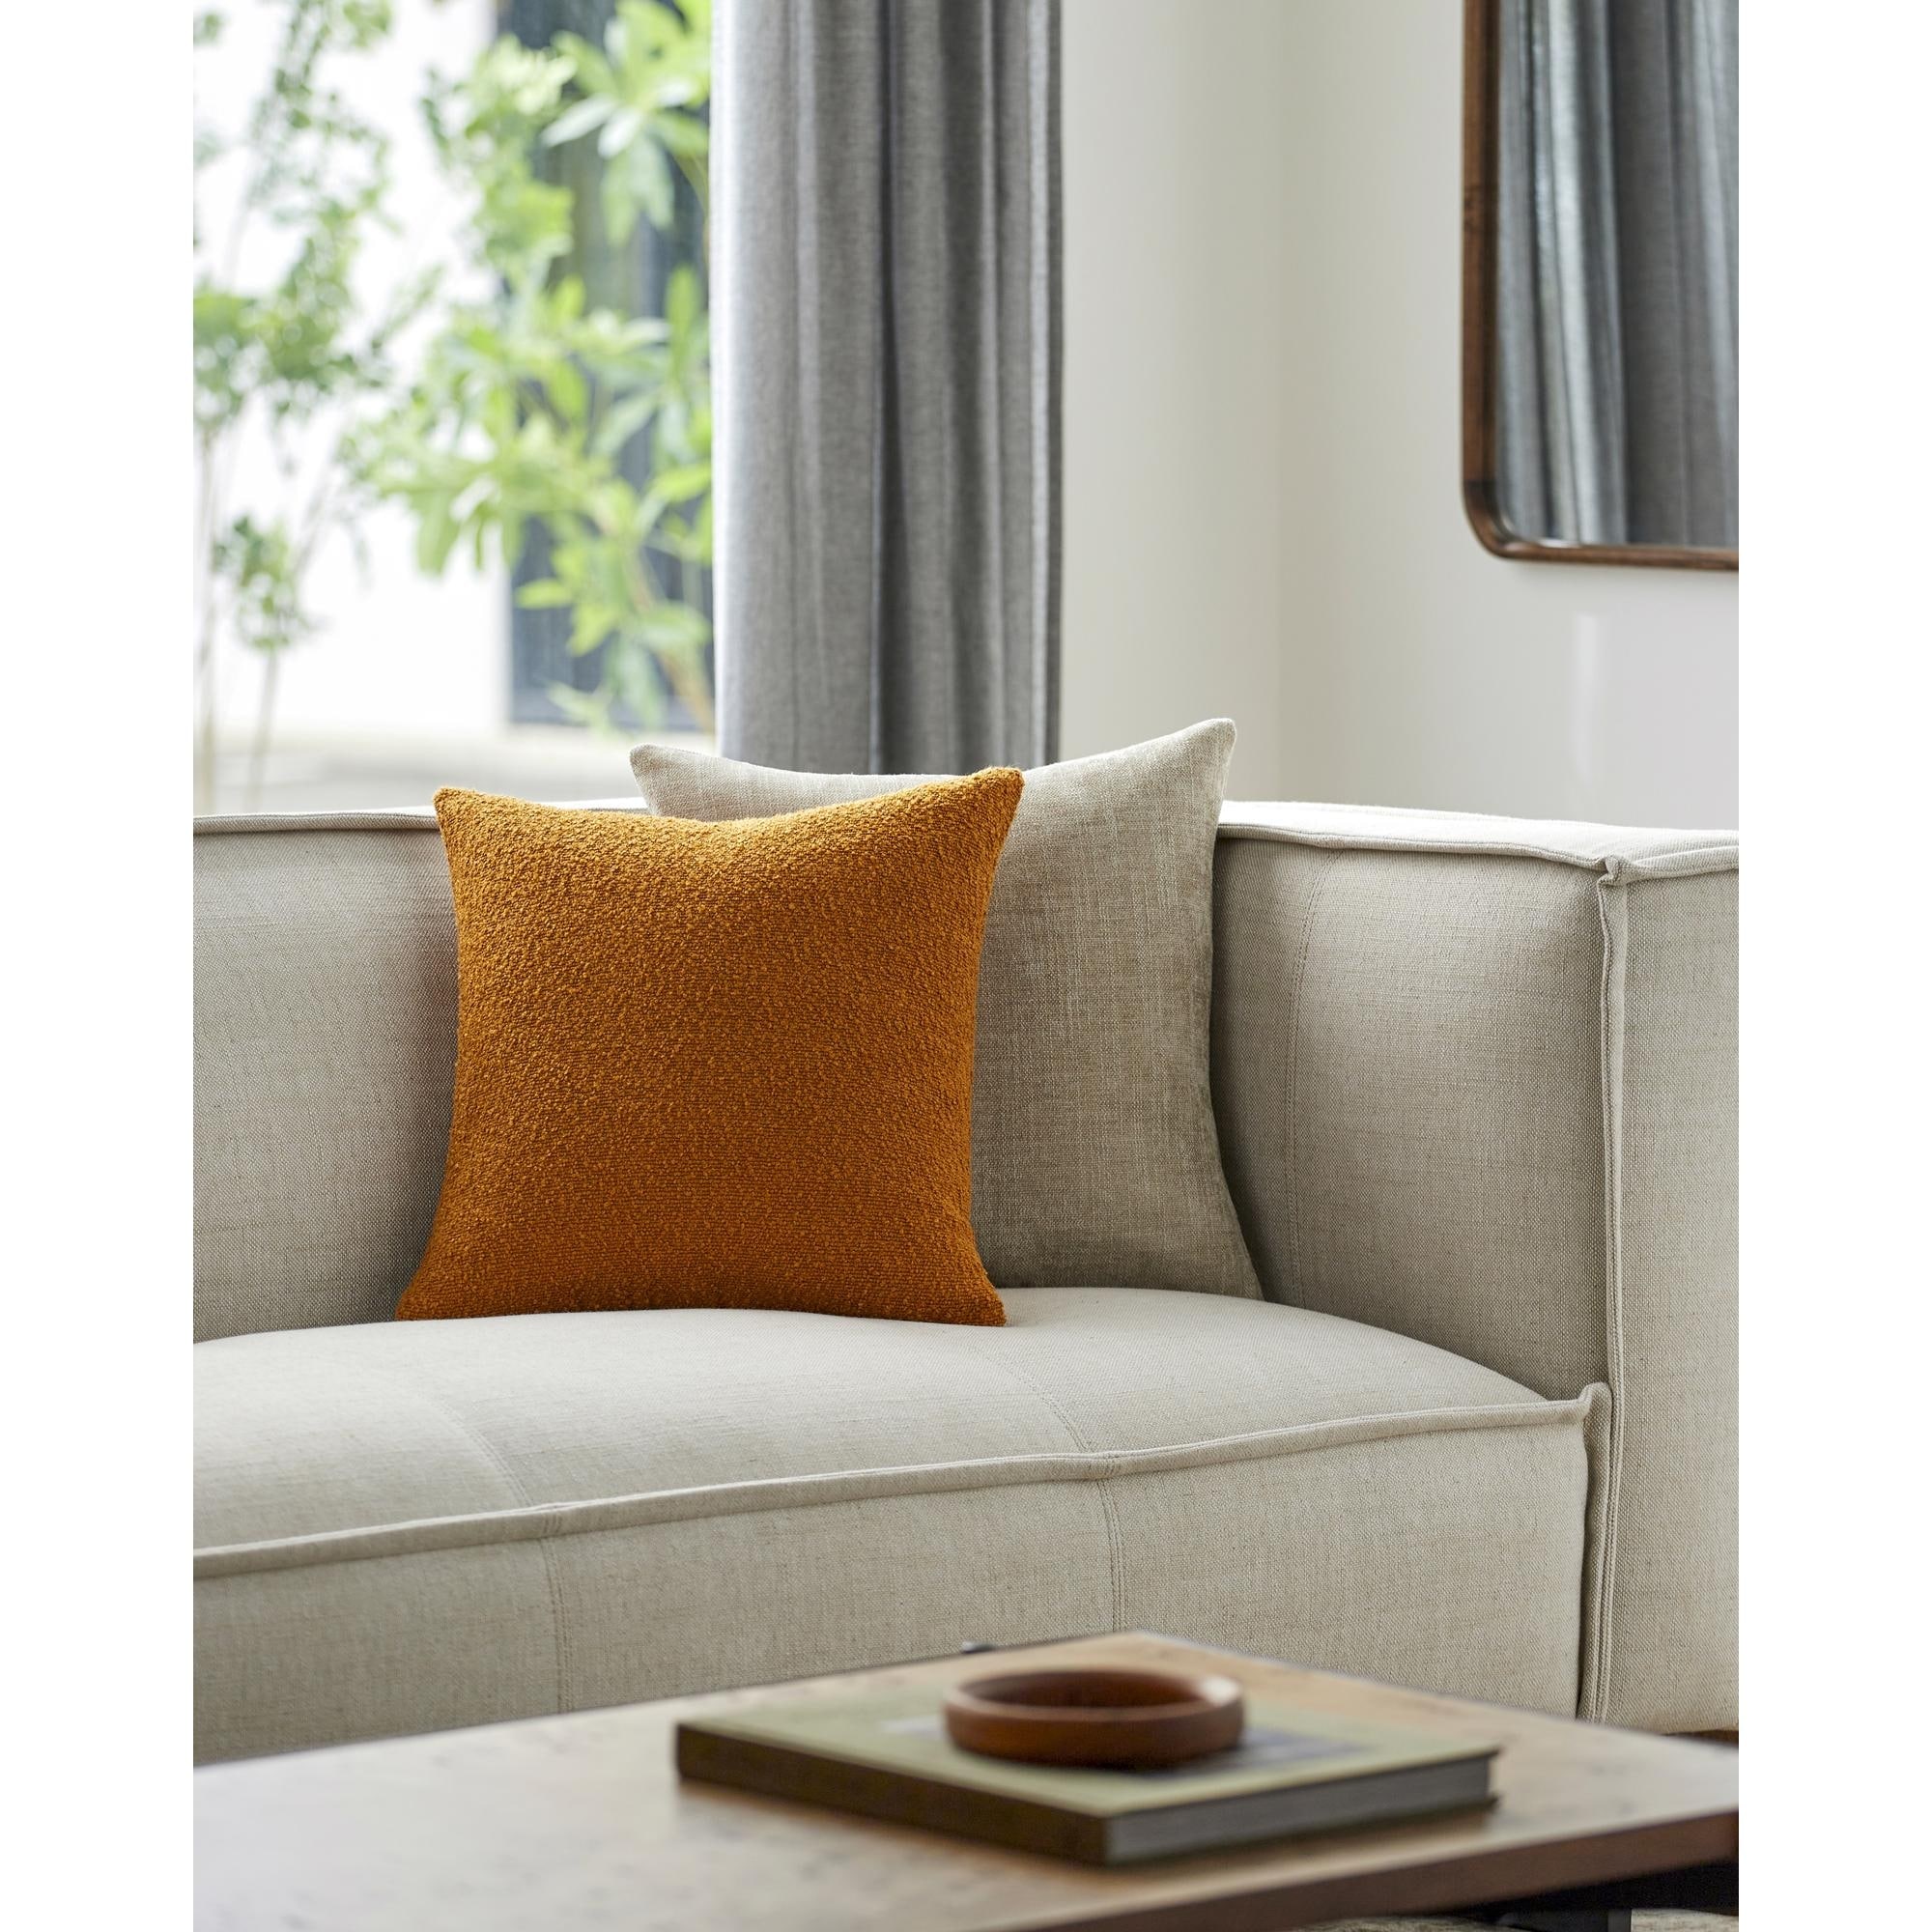 https://ak1.ostkcdn.com/images/products/is/images/direct/b73cd80bfba77a2dfcfc2a2aa998704e858ec259/Isaak-Modern-%26-Contemporary-Solid-Color-Accent-Pillow.jpg